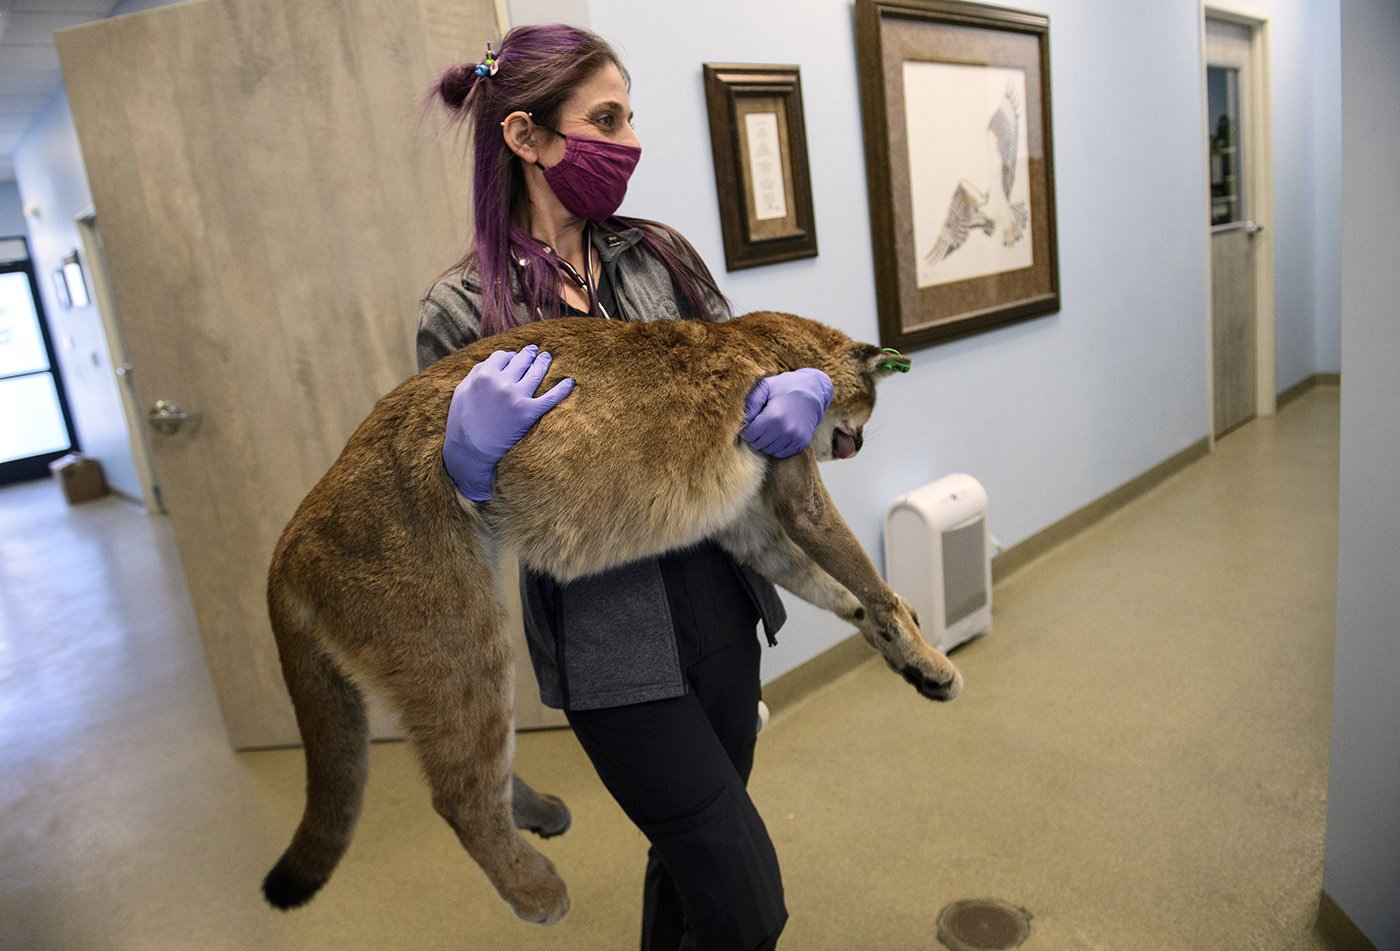  Lauren Genger, a licensed veterinary technician, carries an anesthetized mountain lion cub to the operating room for a procedure last year. The cub,  struck by a car on the 241 toll road, was injured too badly to be released back into the wild. He h